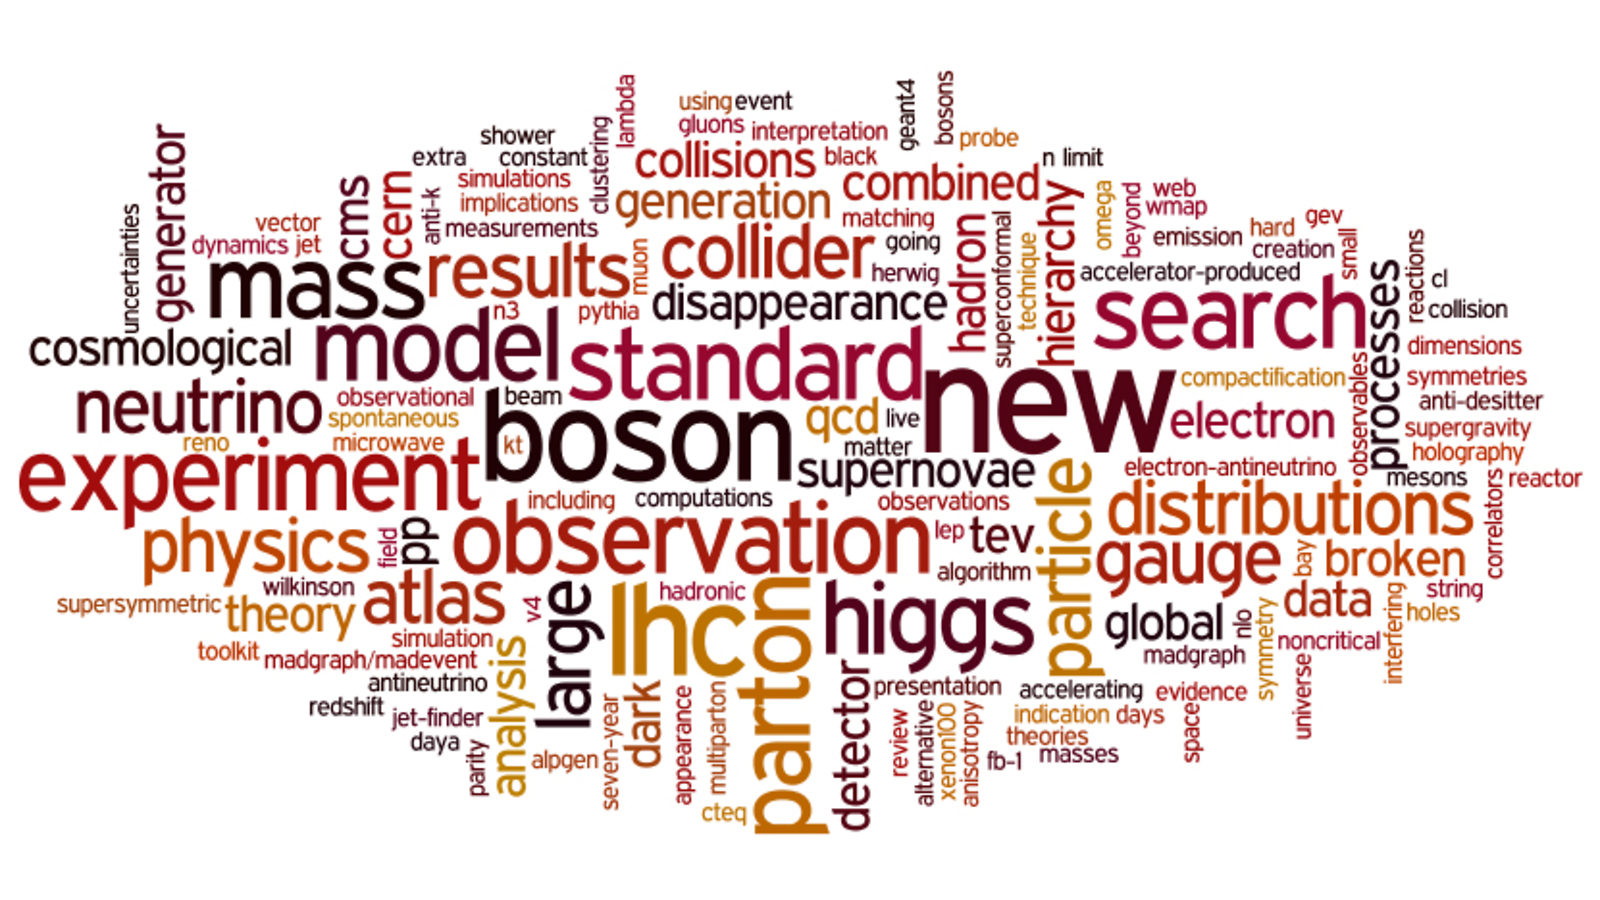 Image of 2012 INSPIRE top cited papers: word cloud 